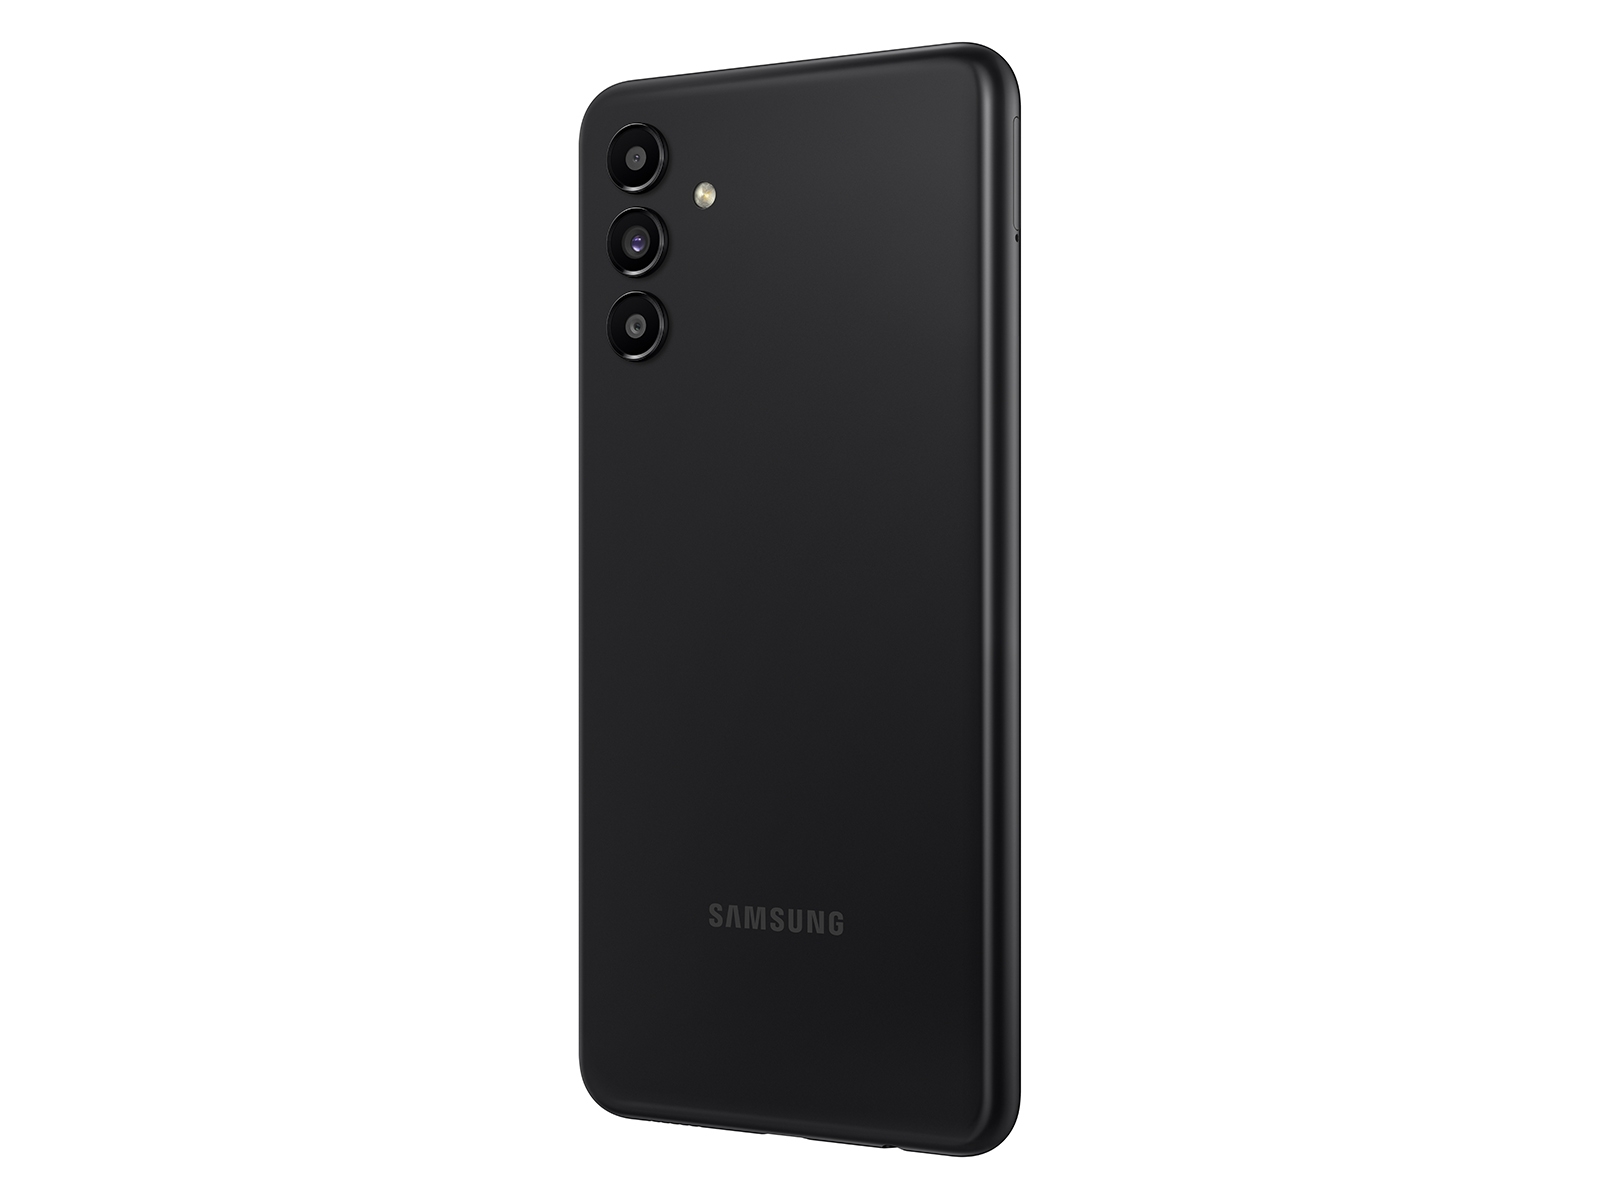 Samsung Galaxy A13 5G an economic commitment to 5G